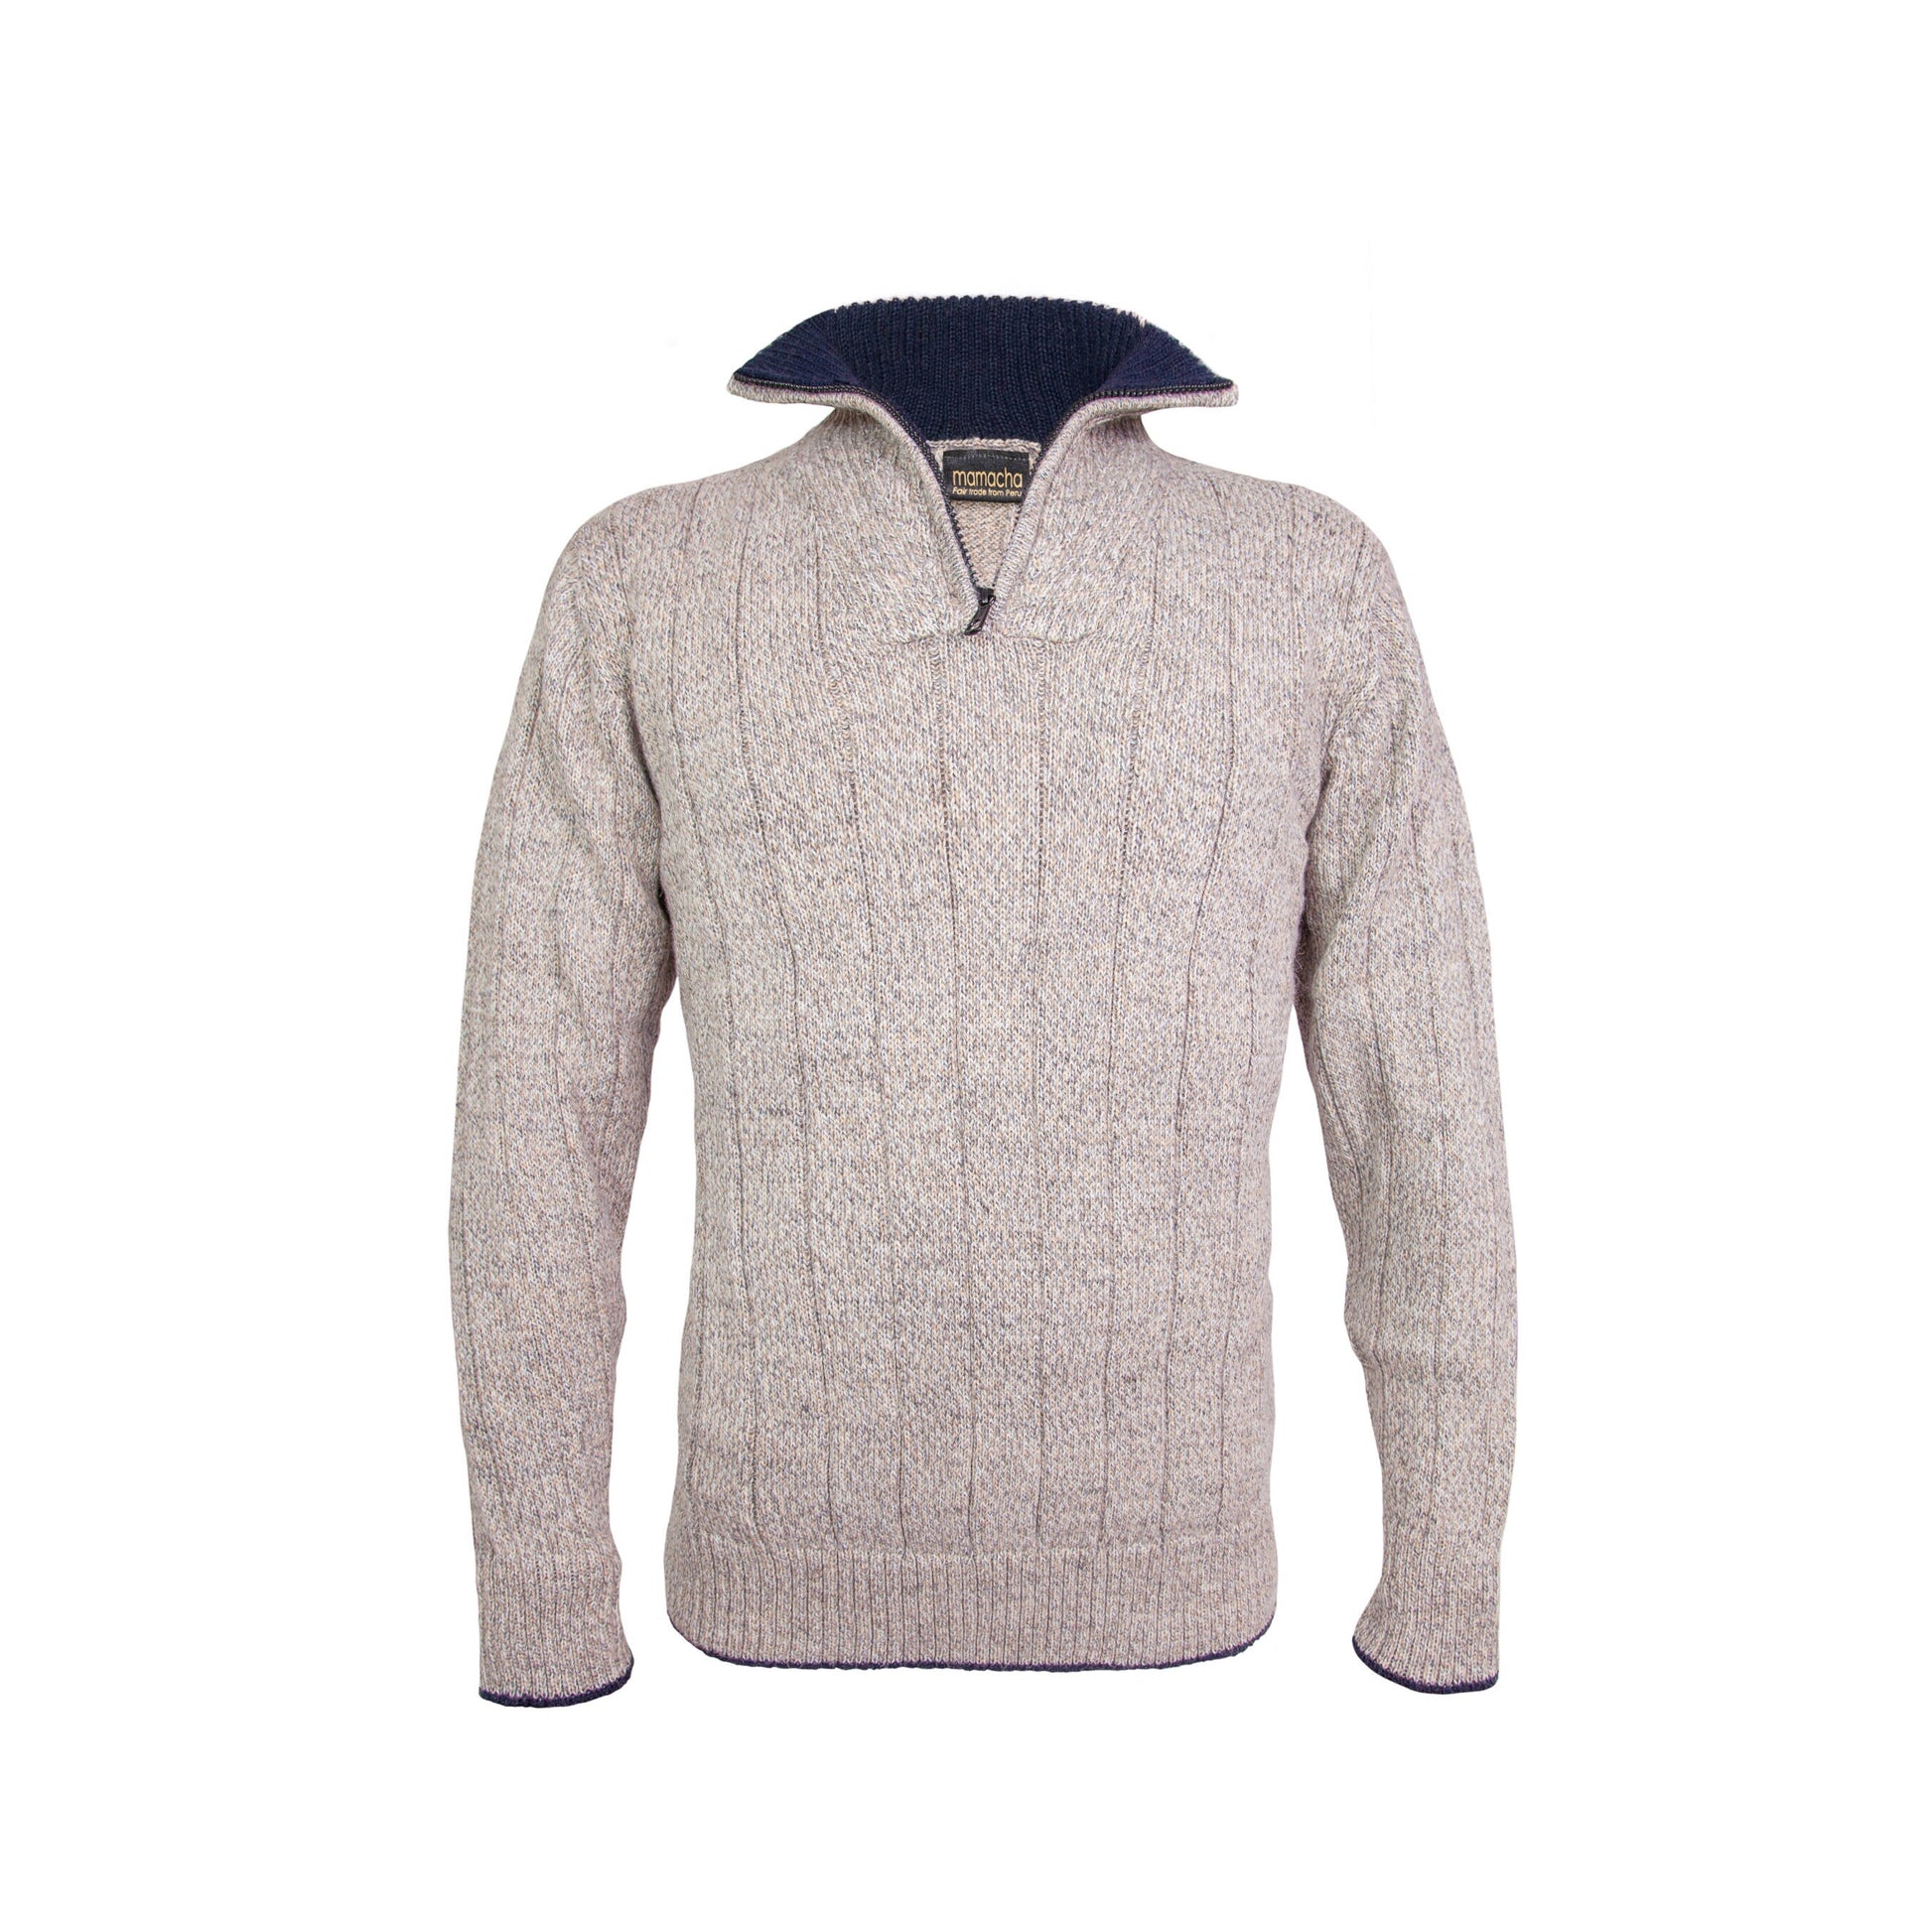 Men's Sweater Alpaca wool zip neck jumper, beige. Warm knit ethical pullover. Small to XXL sizes, fair trade.